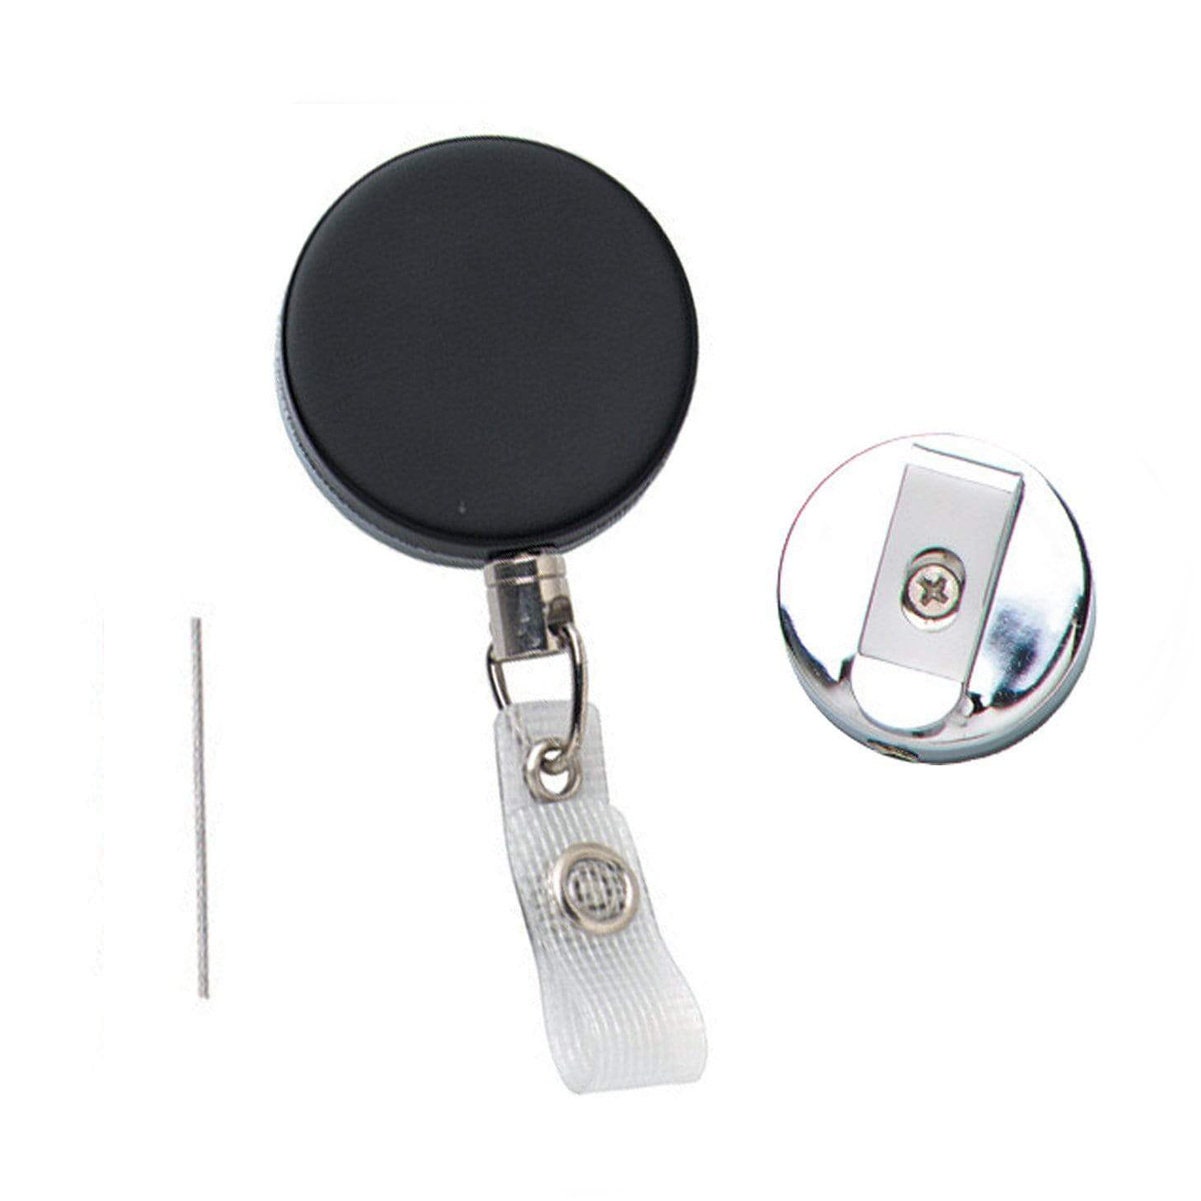 Retractable Badge Reel With Steel Wire Cable Free Ship Heavy Duty All Metal  Badge Holder W/ Belt Clip & Vinyl Strap for ID and Keys 